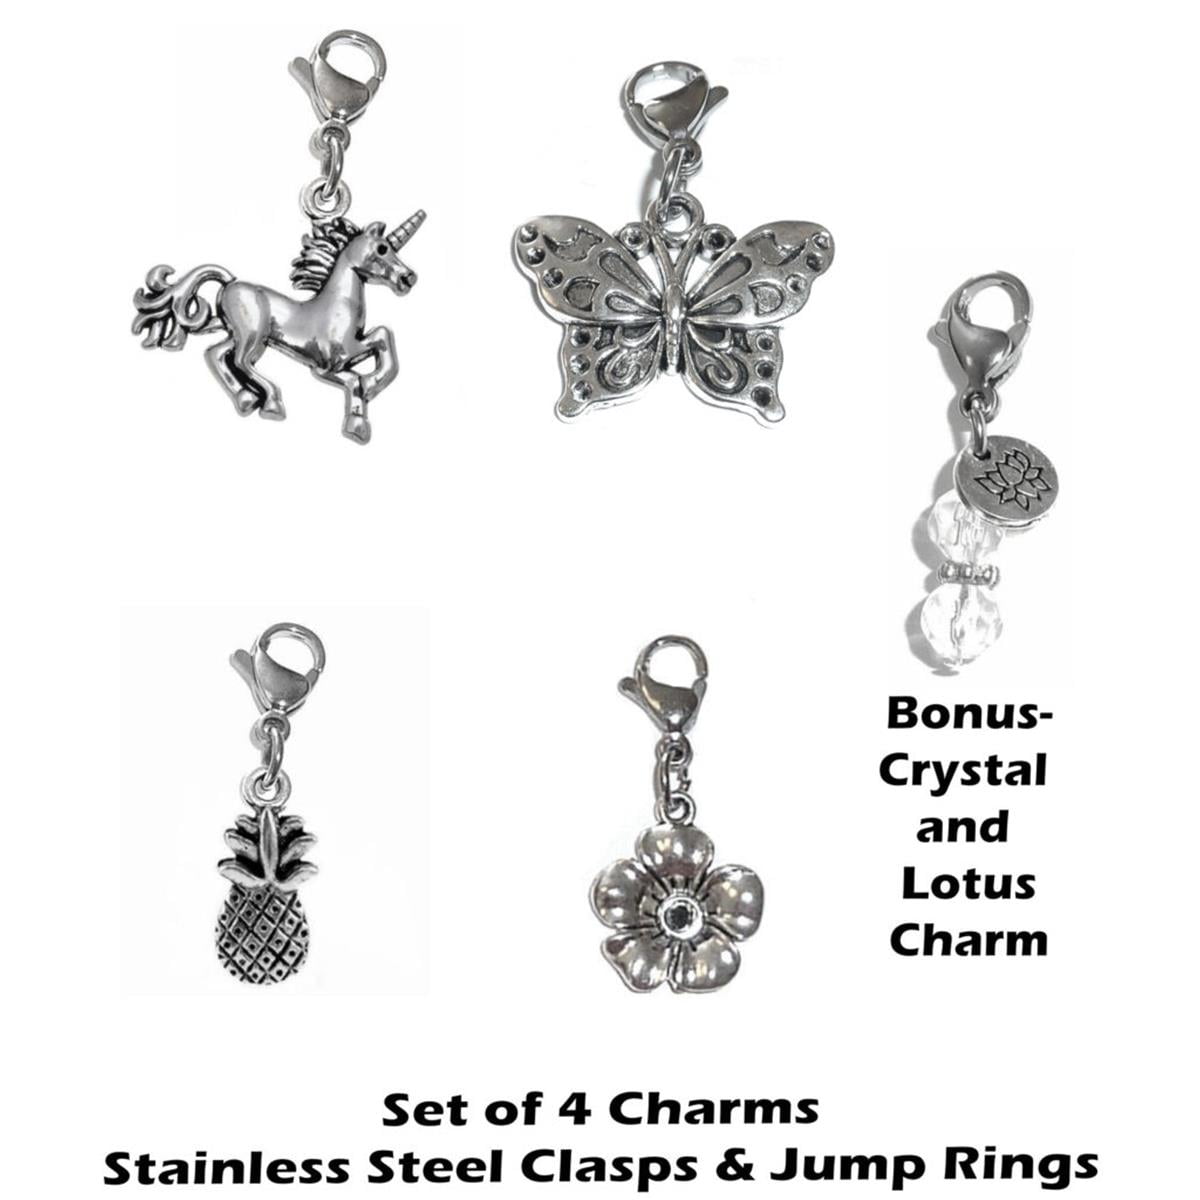 Wedding Charm, Clip On Charms For Your Wedding Party – Make Your Own  Wedding Charm Jewelry With Easy To Use Clip On Charms - Sister Of The Groom  Charm